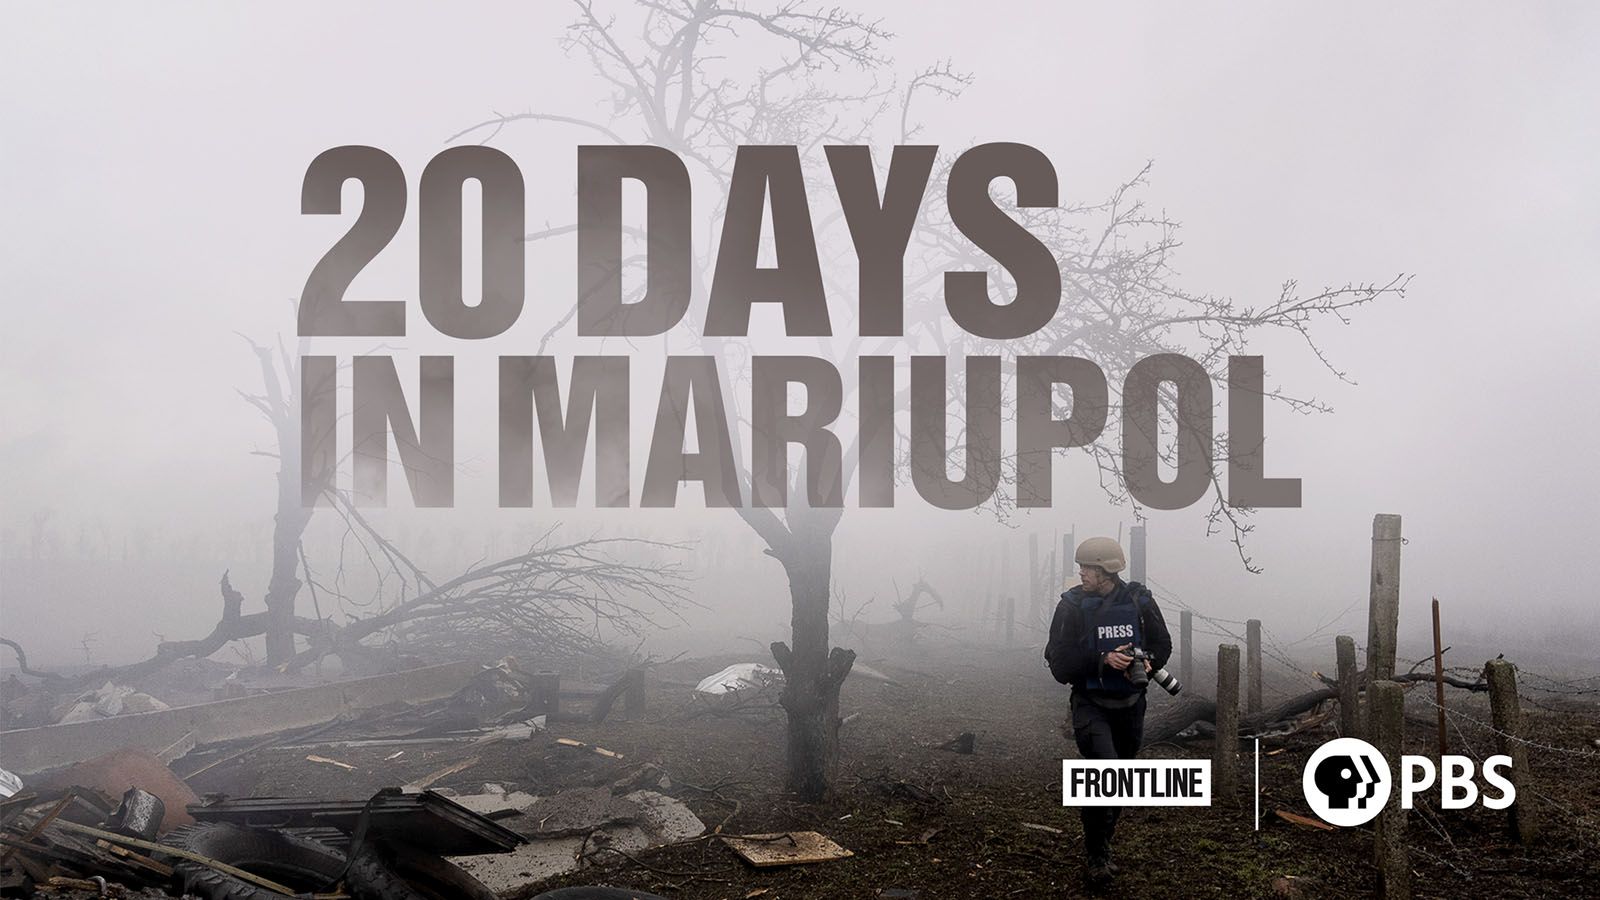 The Oscar-nominated documentary "20 Days in Mariupol" will be screened at Cinema Center on Saturday, Feb. 3.